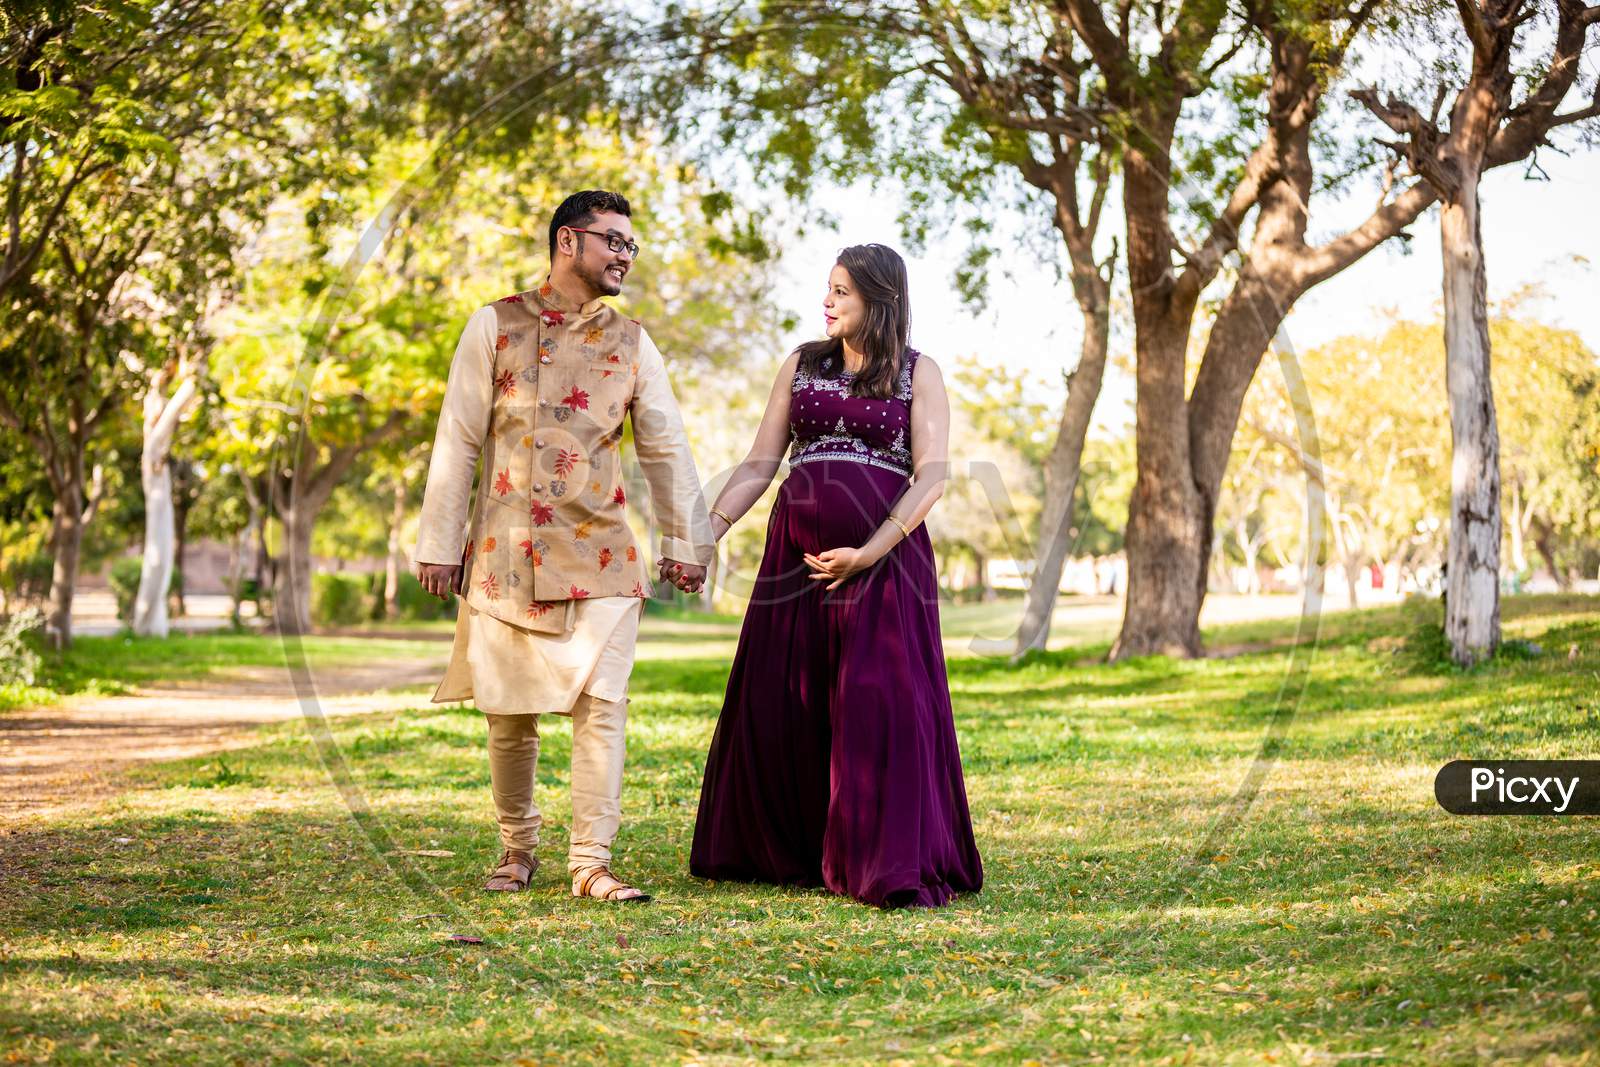 Happy Asian Indian Pregnant Woman With Her Husband In Walking Outdoor In A Park Or Garden, Smiling Cheerful Young Parents Looking At Camera Expecting Baby.